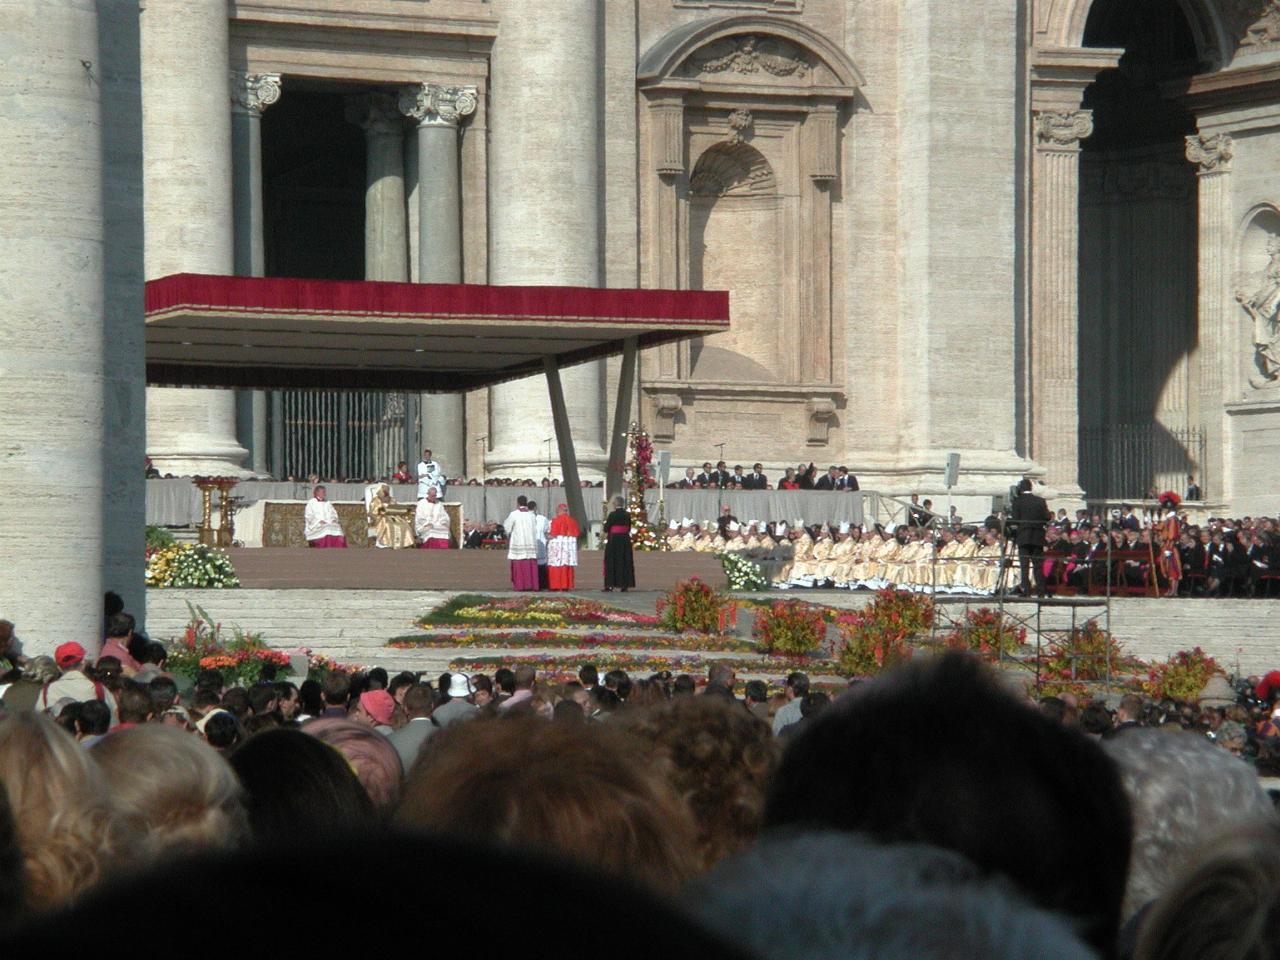 Pope John Paul II on the dias for canonisation Mass